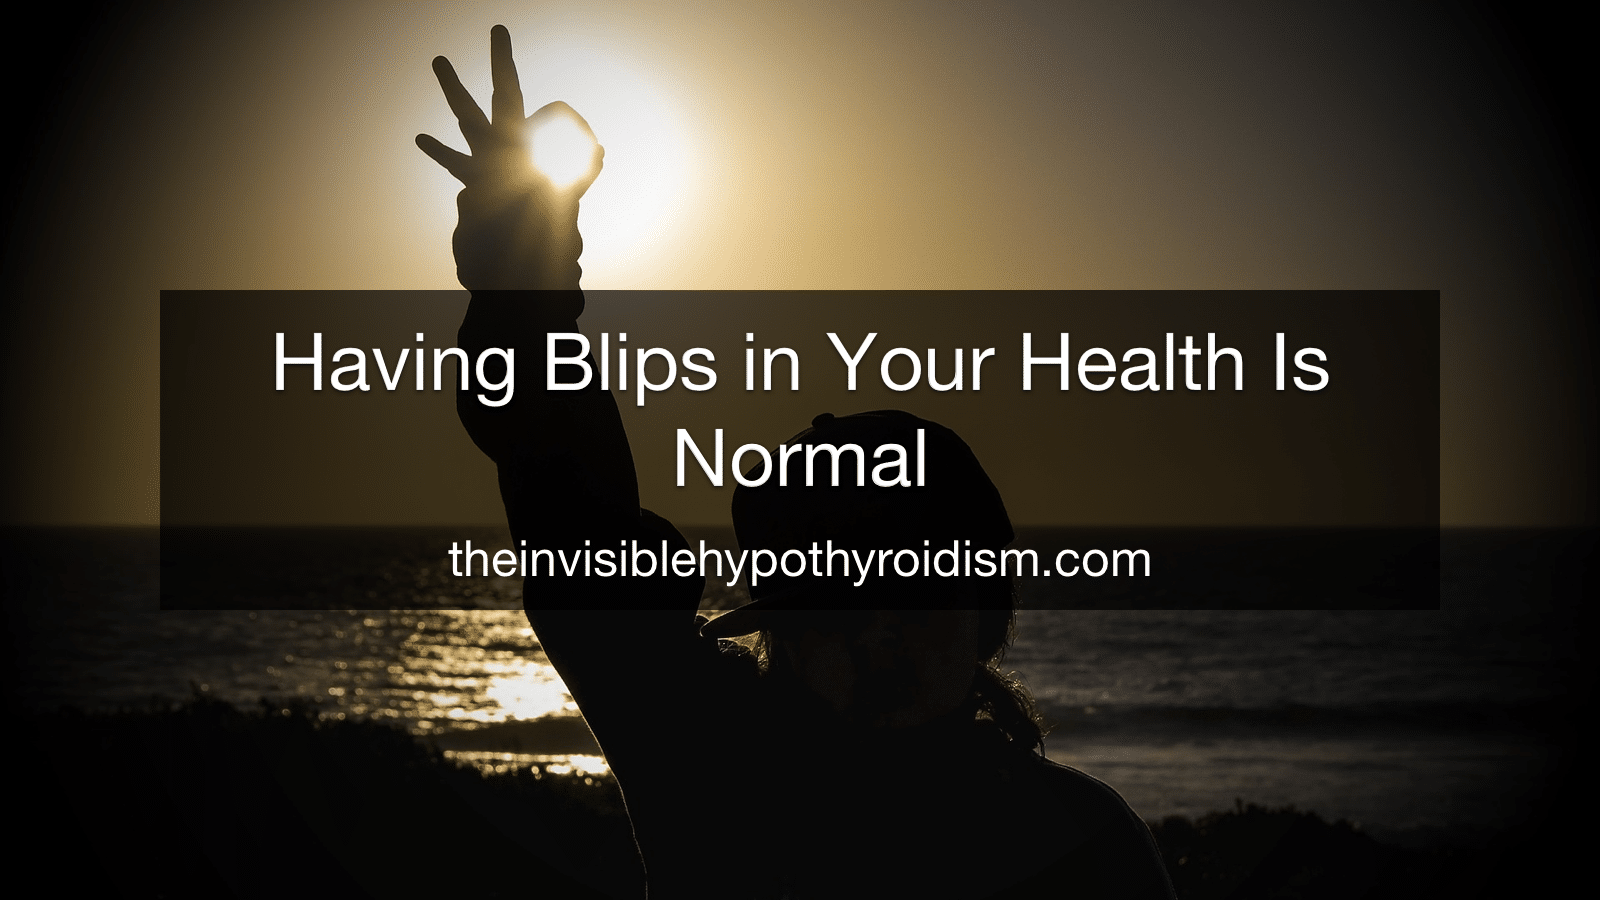 Having Blips in Your Health Is Normal